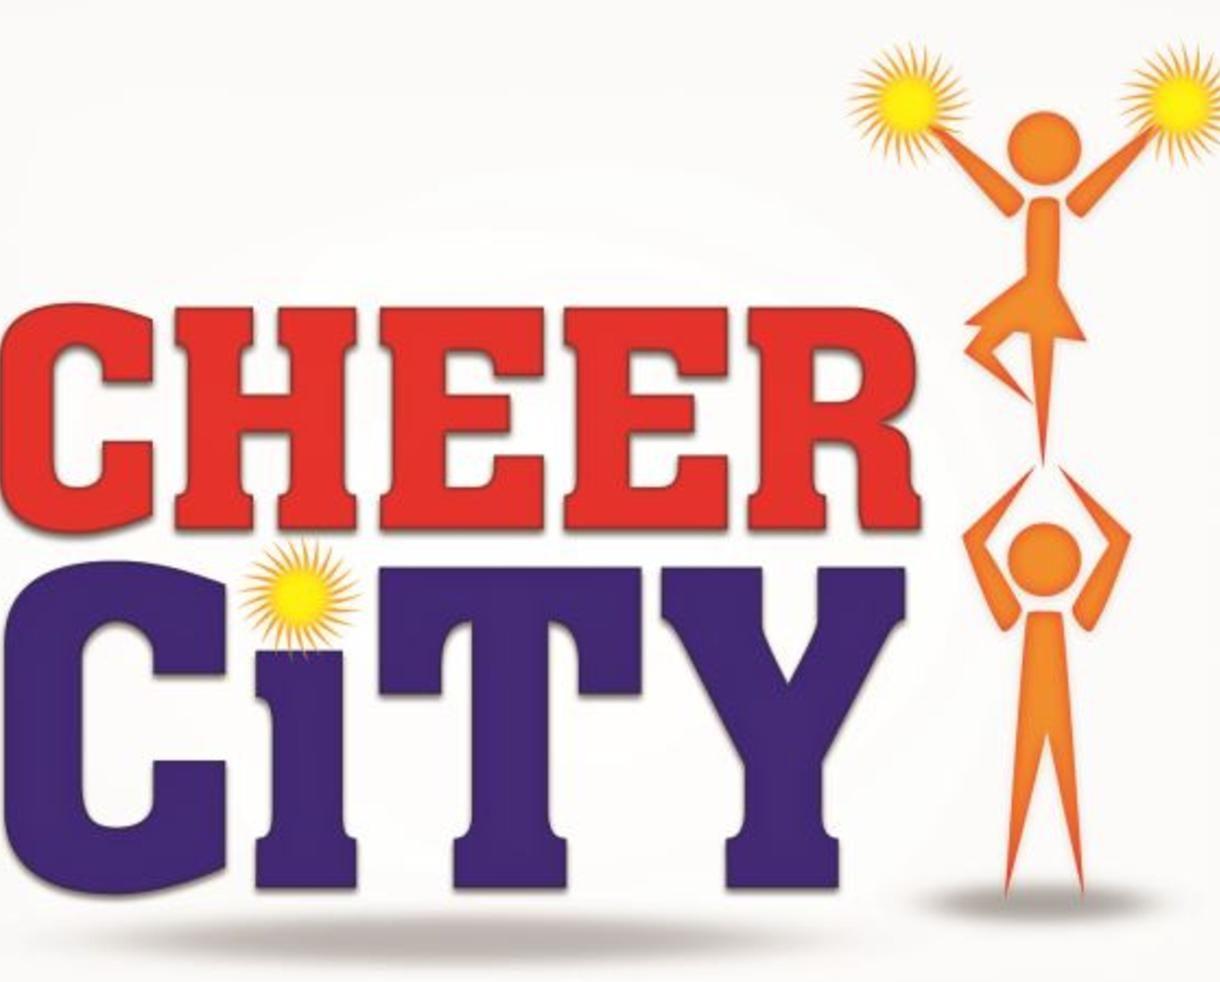 Cheer Camp Logo - Deal: $99 for FULL WEEK Cheer Camp, Age 6-14, with Cheer City! at ...